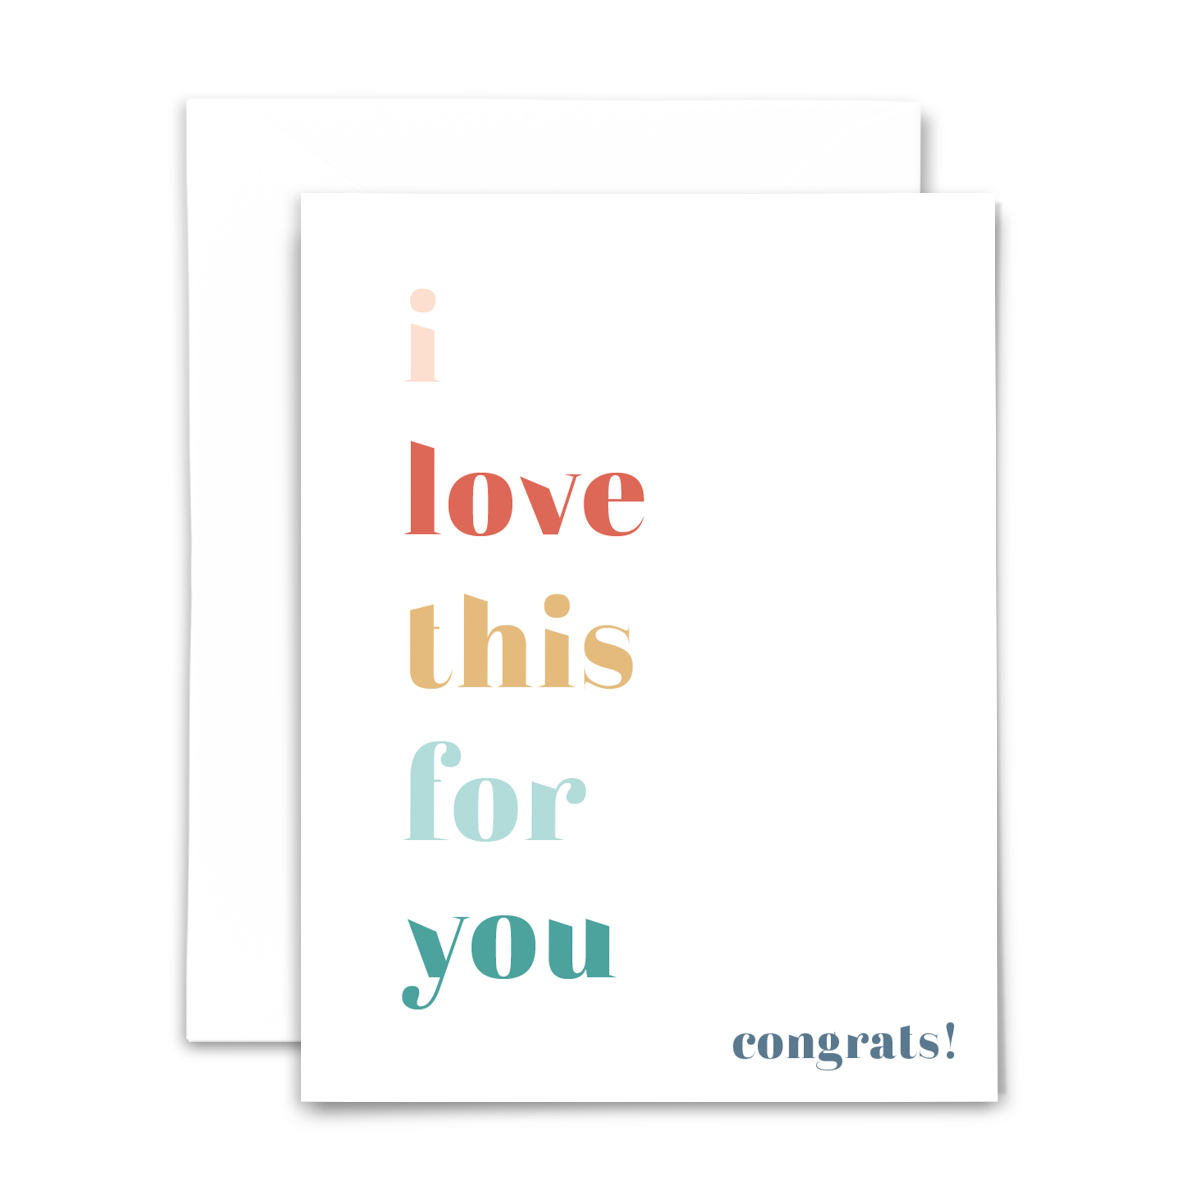 'I love this for you; congrats!' greeting card with blank interior; colorful text on white card